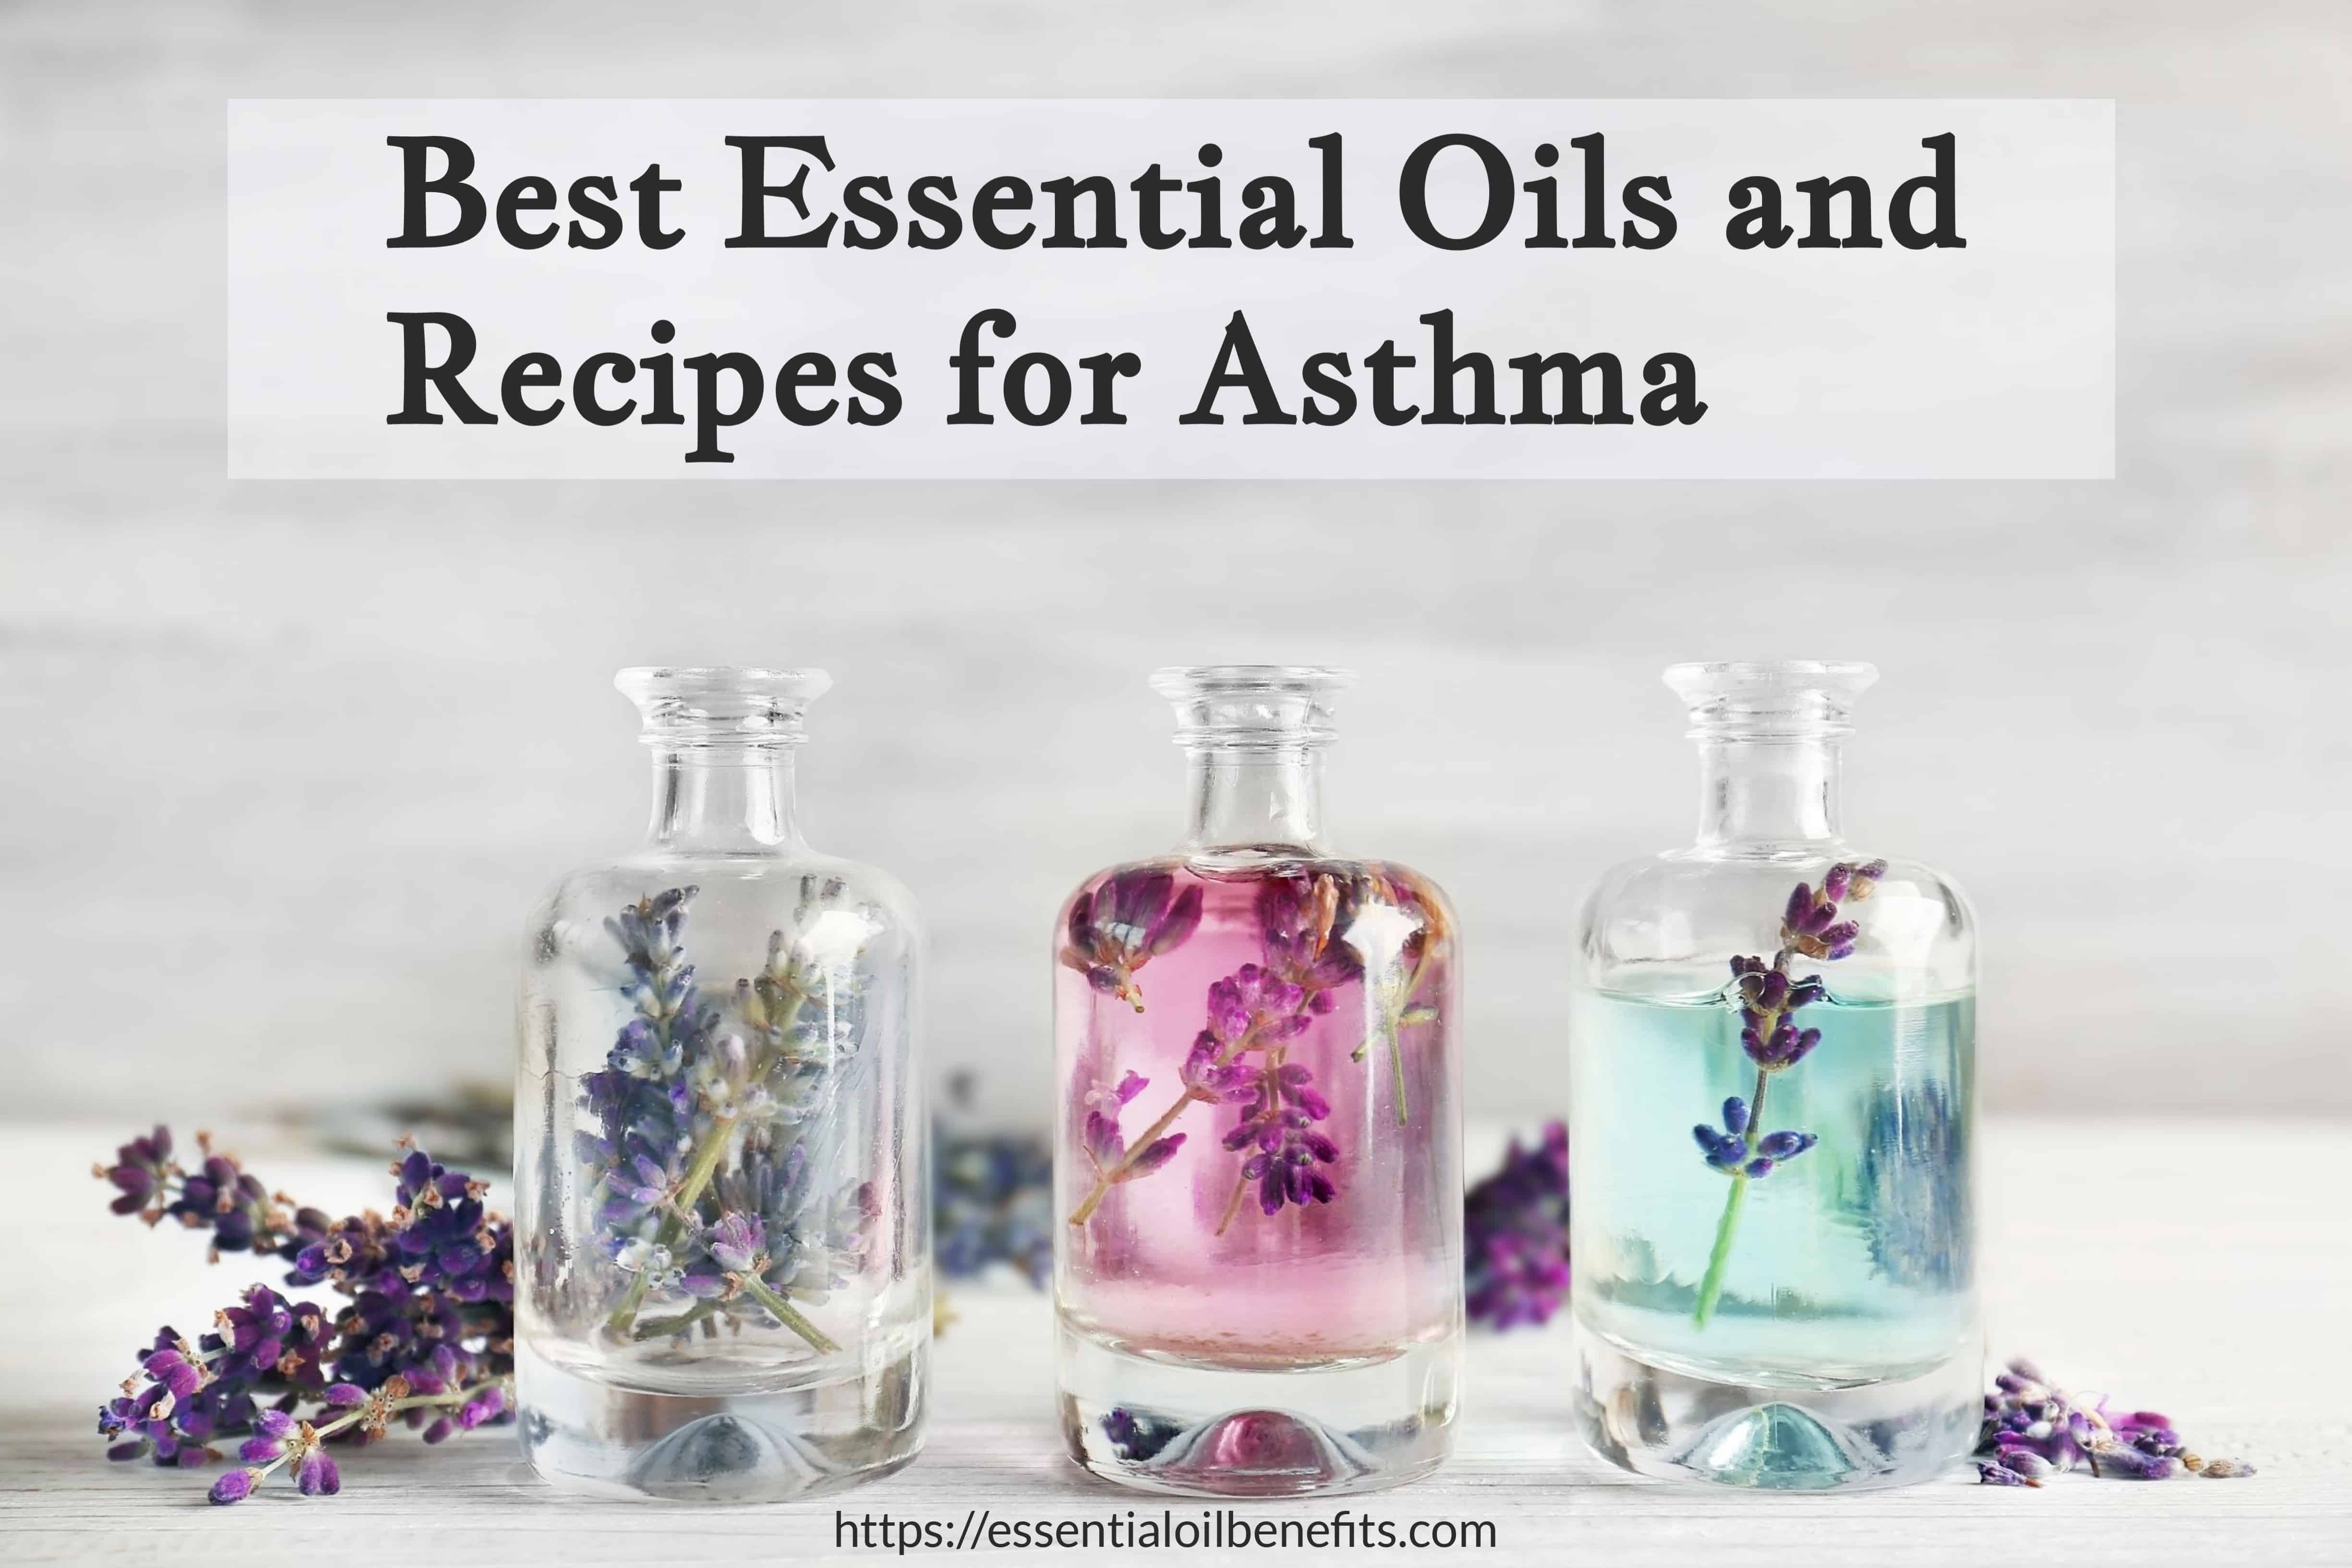 Can Essential Oils be Used for Asthma Treatment?